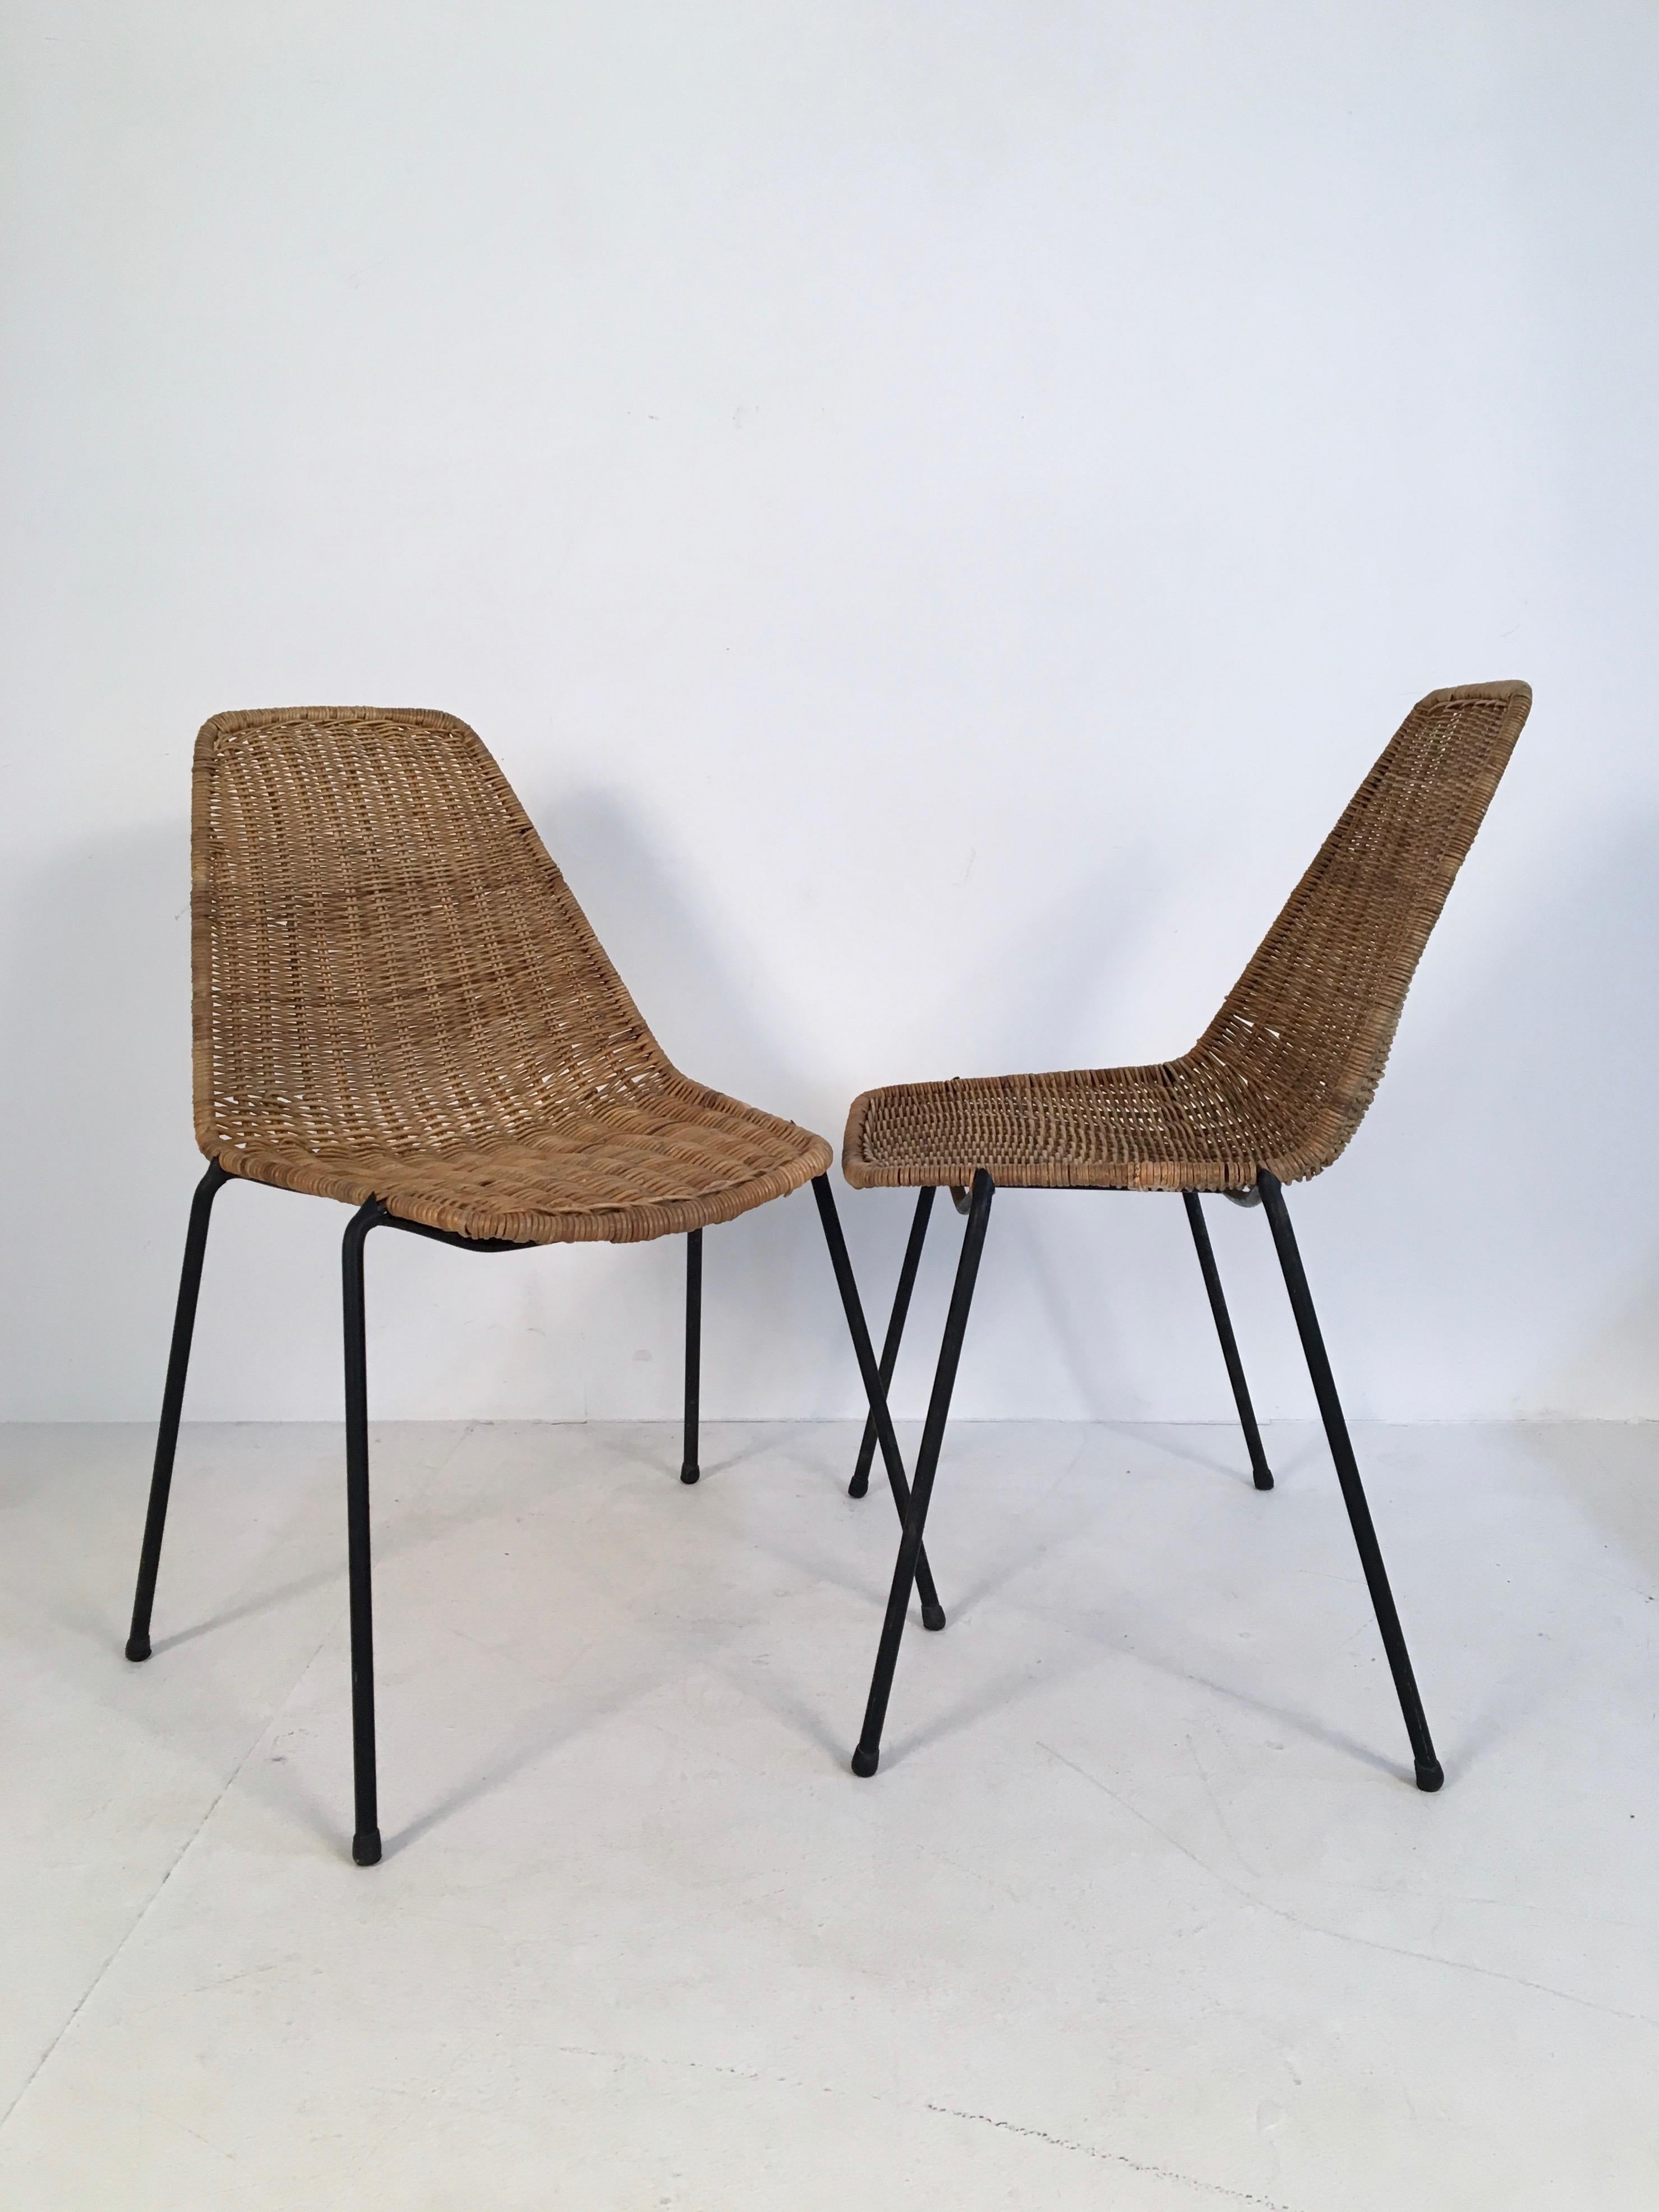 Mid-Century Modern 2 Midcentury Wicker Chairs by Campo & Graffi for Home Torino, Italy, circa 1950 For Sale